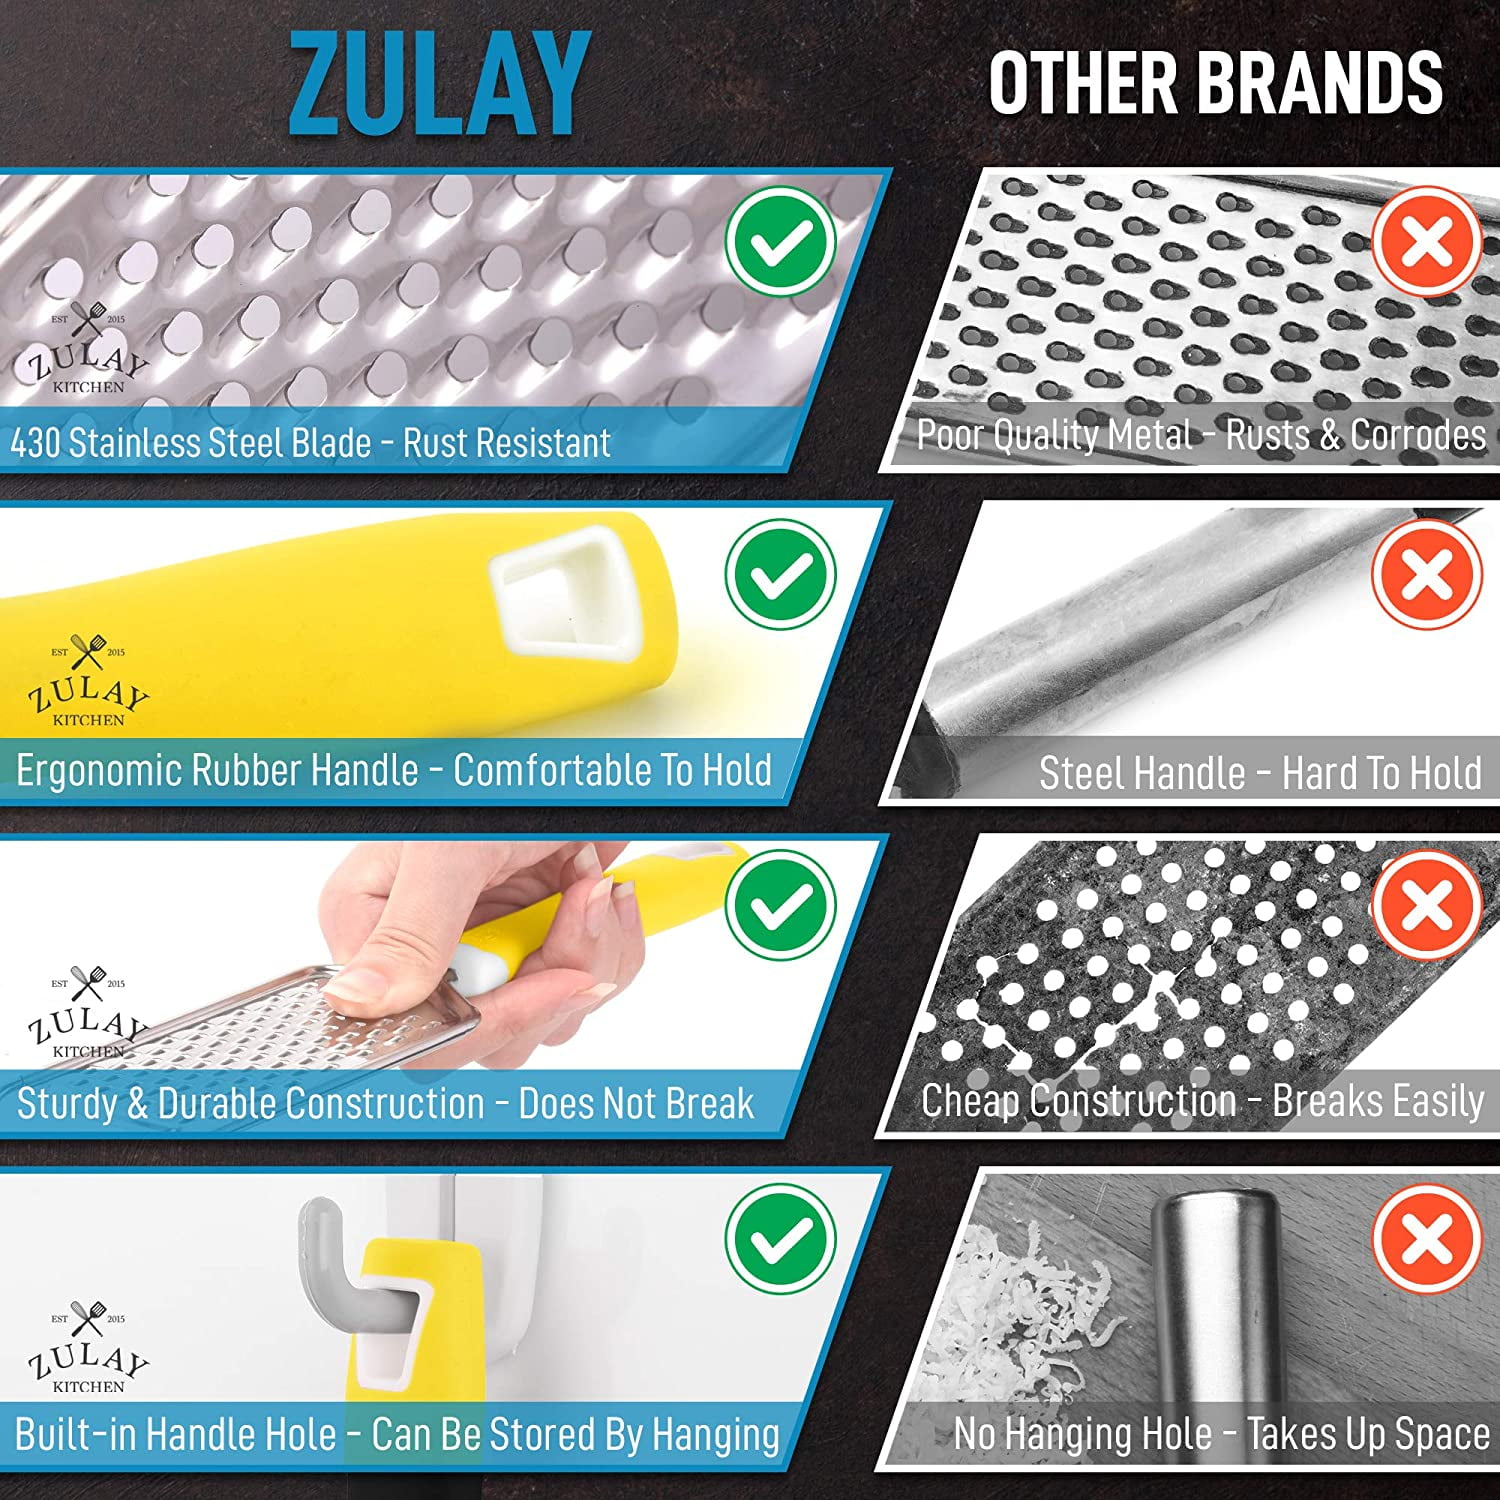 Zulay Kitchen Professional Stainless Steel Flat Handheld Cheese Grater -  Yellow, 1 - Kroger